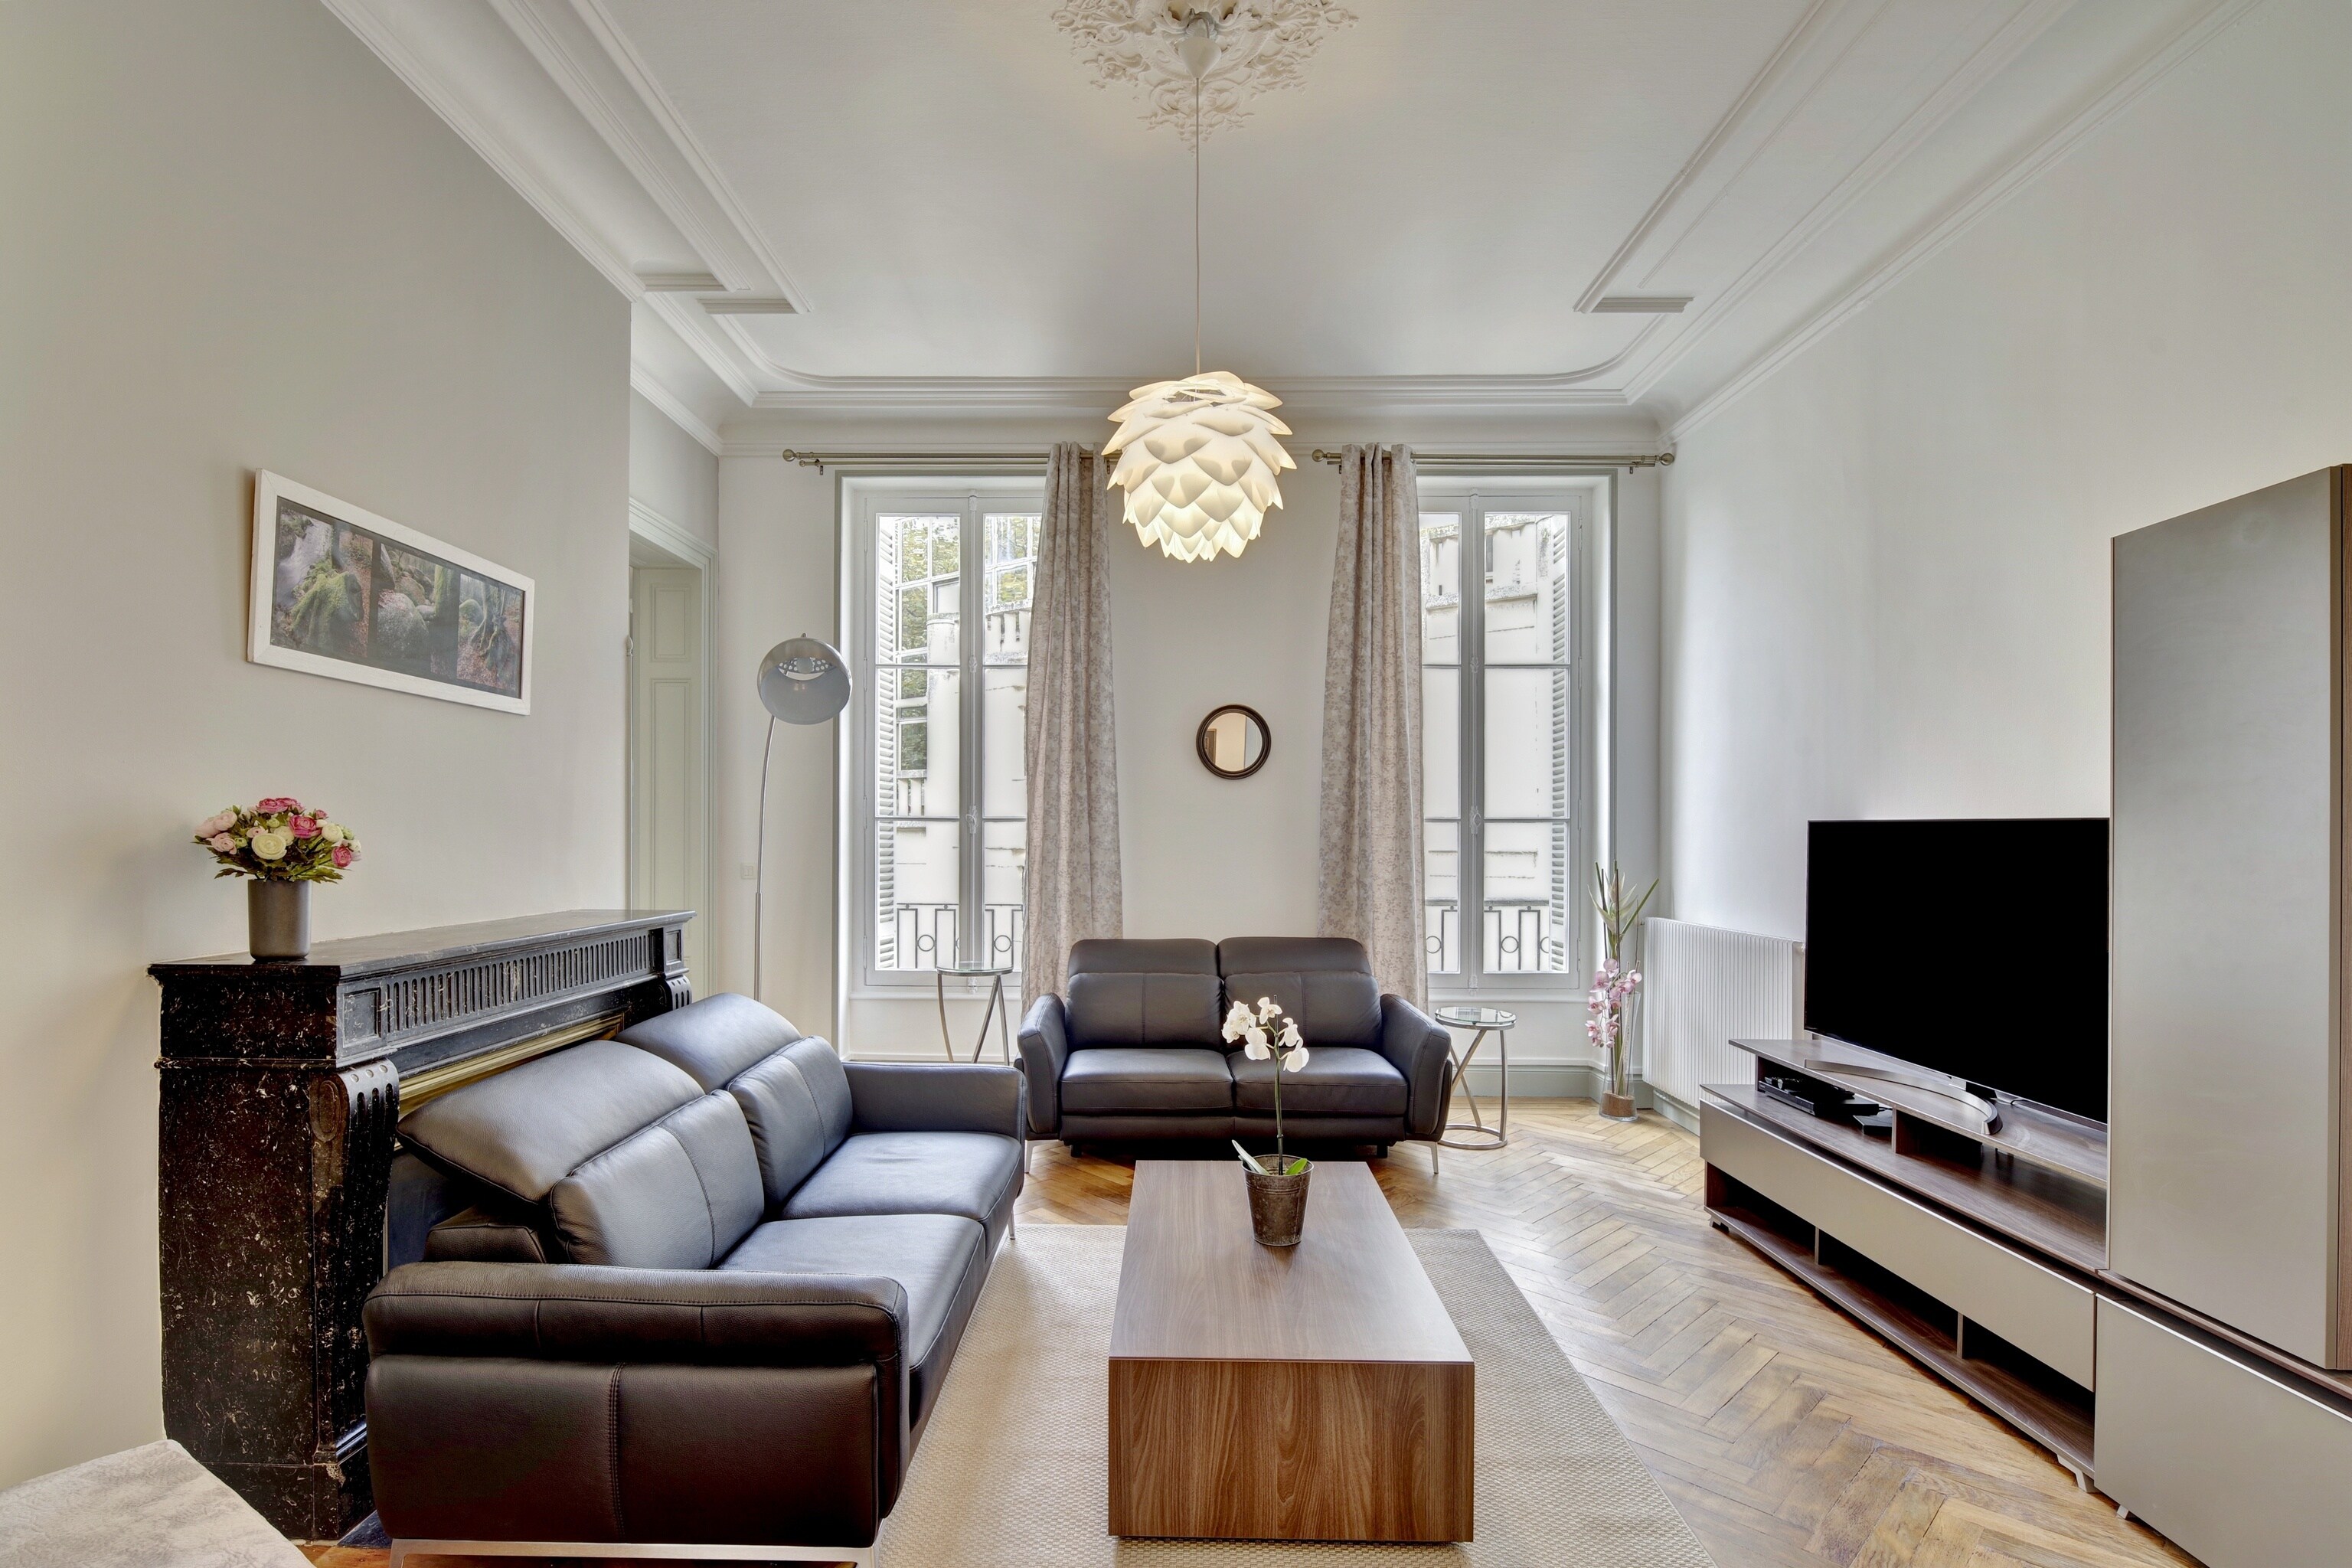 Property Image 2 - Sophisticated four bedroom flat in Bordeaux’s golden triangle